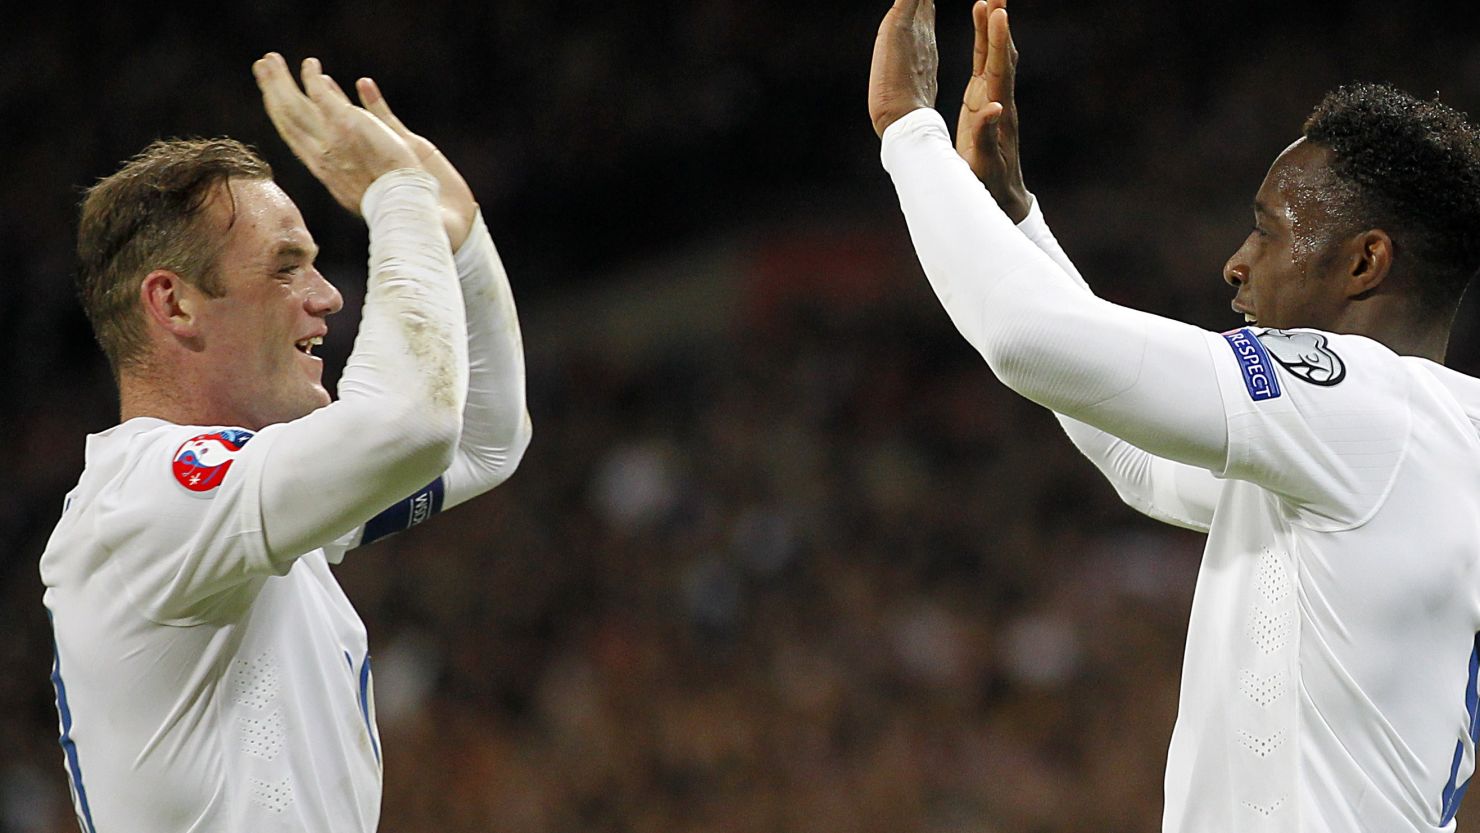 England scorers Wayne Rooney and Danny Welbeck (right) celebrate in the 3-1 win over Slovenia at Wembley.